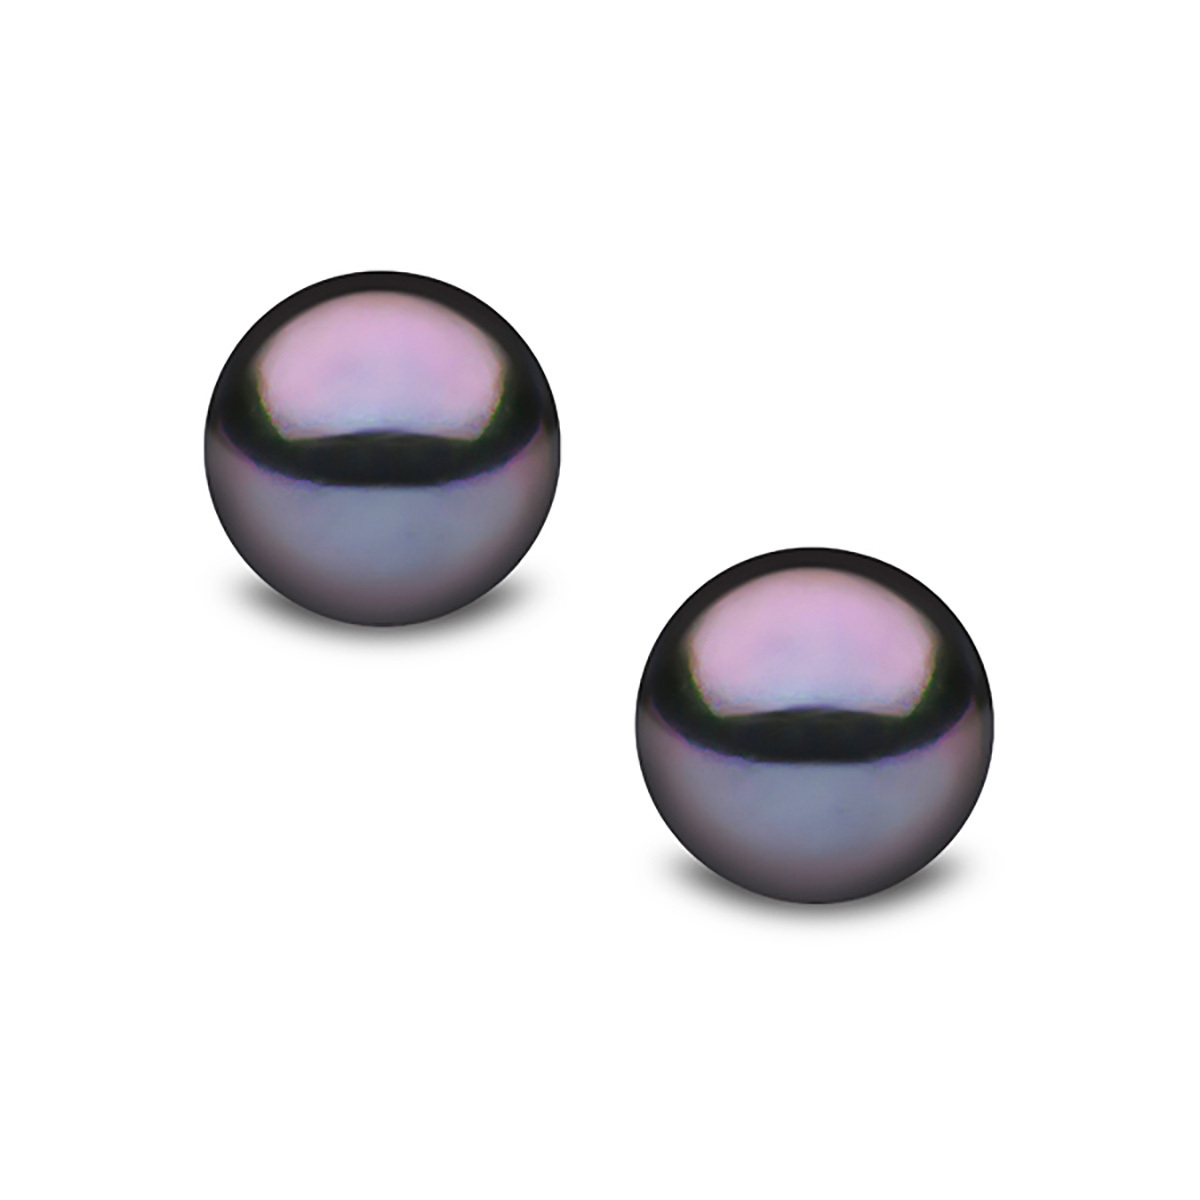 8-8.5mm Cultured Freshwater Black Pearl Stud Earrings, 18ct Yellow Gold